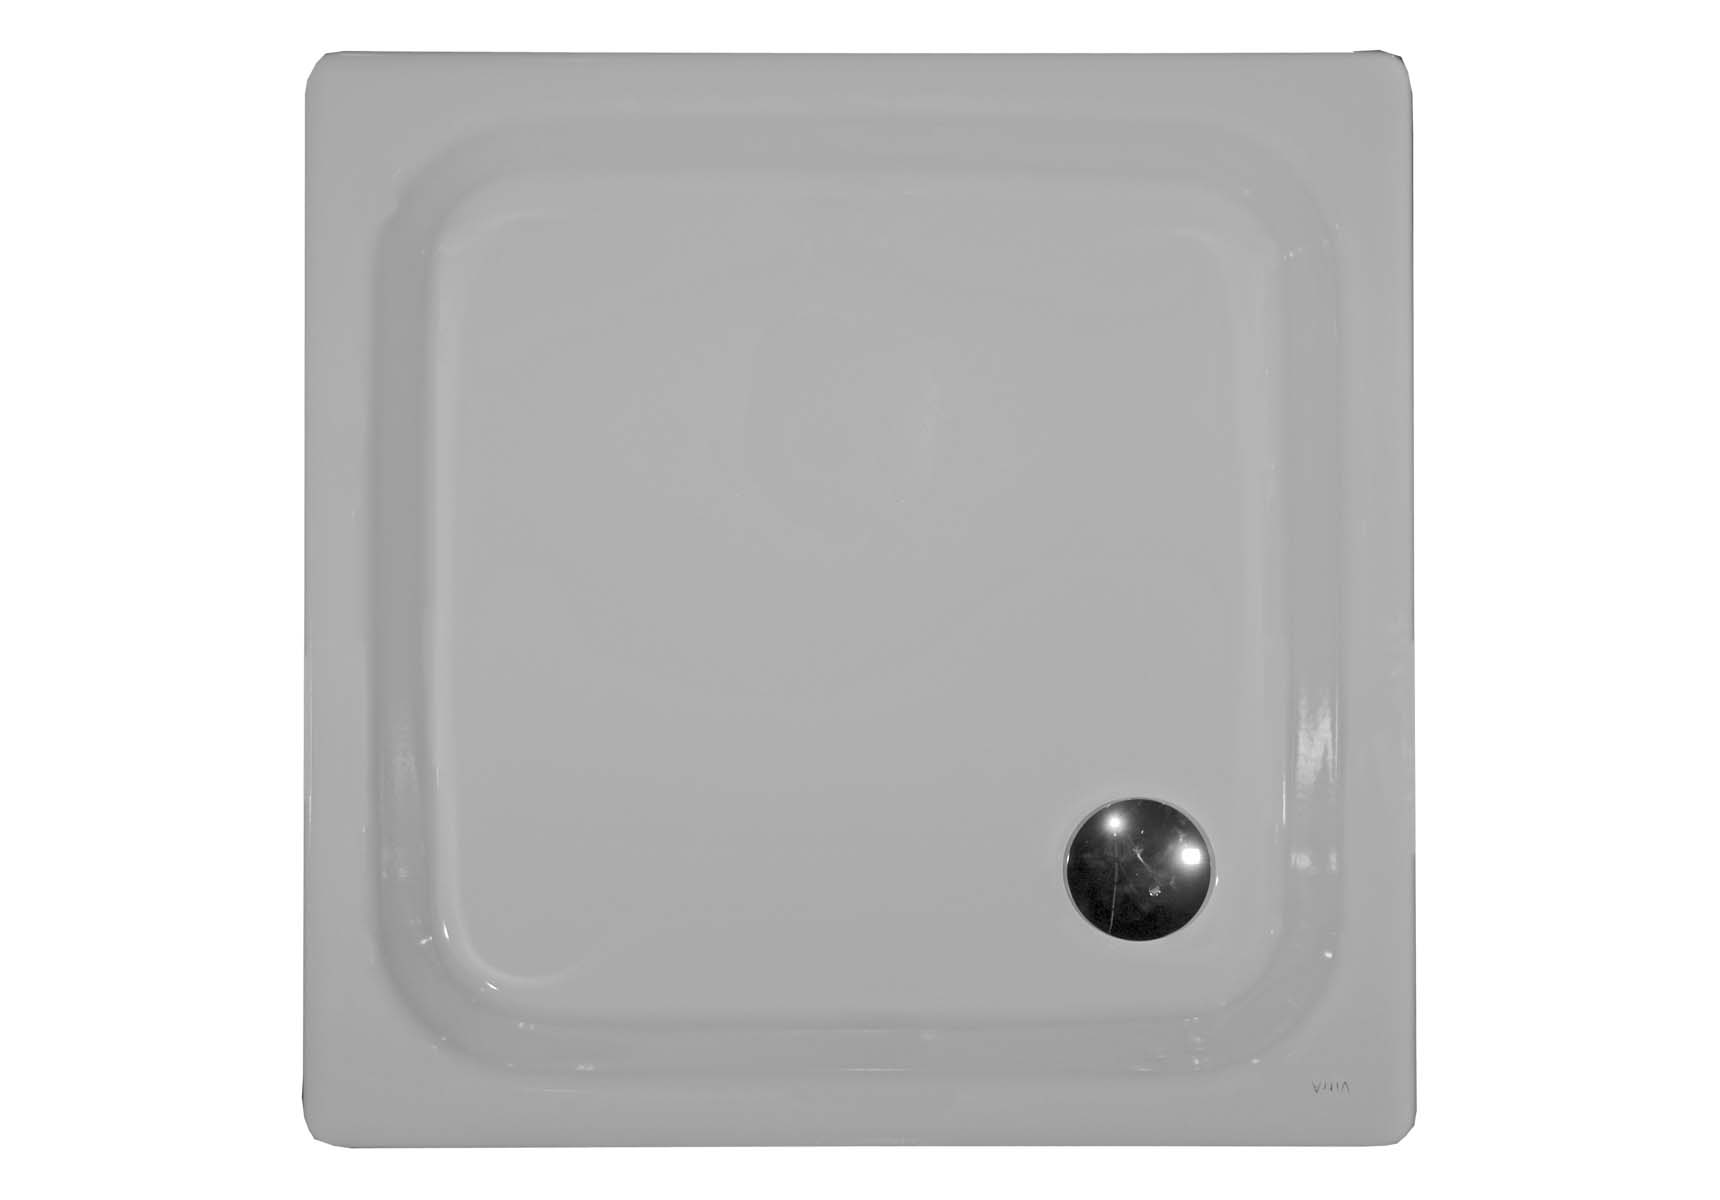 Generic Square 80x80 cm Steel Shower Tray, 3.5 Mm, H:6.5 cm, 90 Mm Waste, Sound Proofing Pad